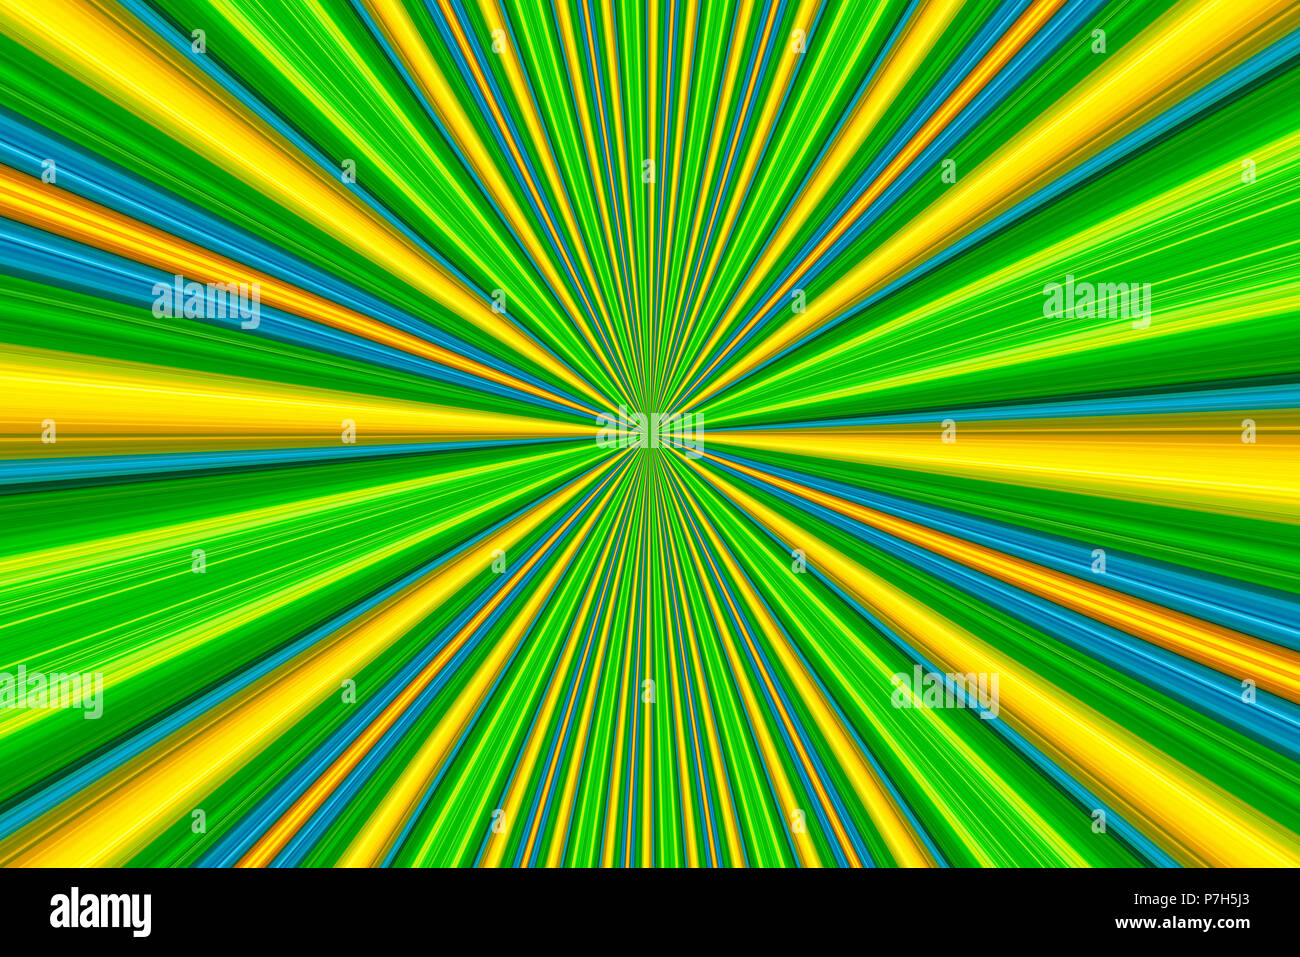 Colorful starburst abstract background Stock Photo